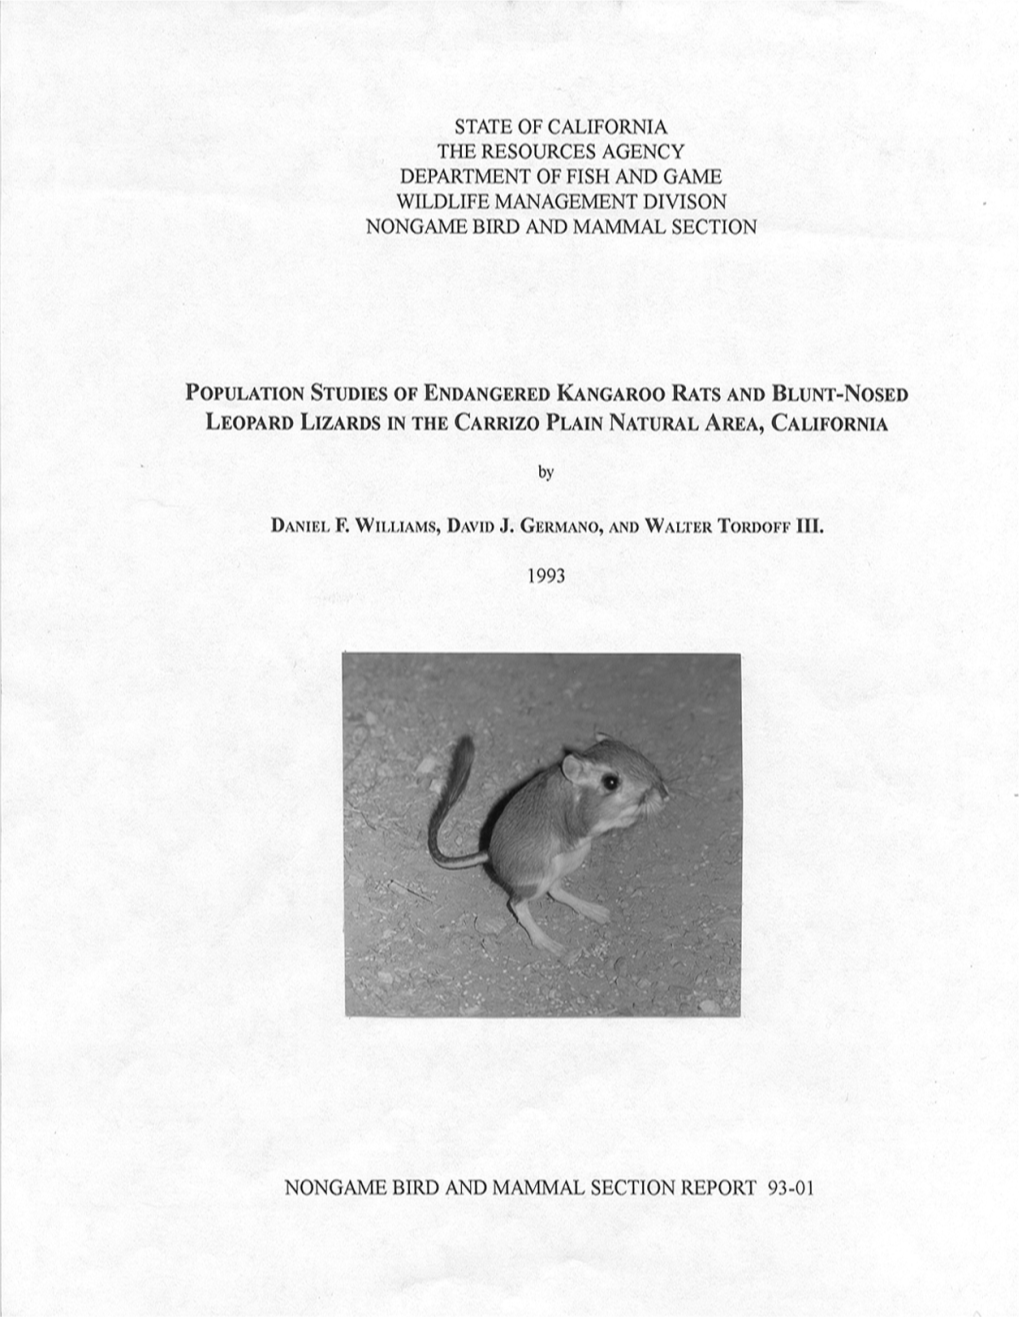 Population Studies of Endangered Kangaroo Rats and Blunt-Nosed Leopard Lizards in the Carrizo Plain Natural Area, California